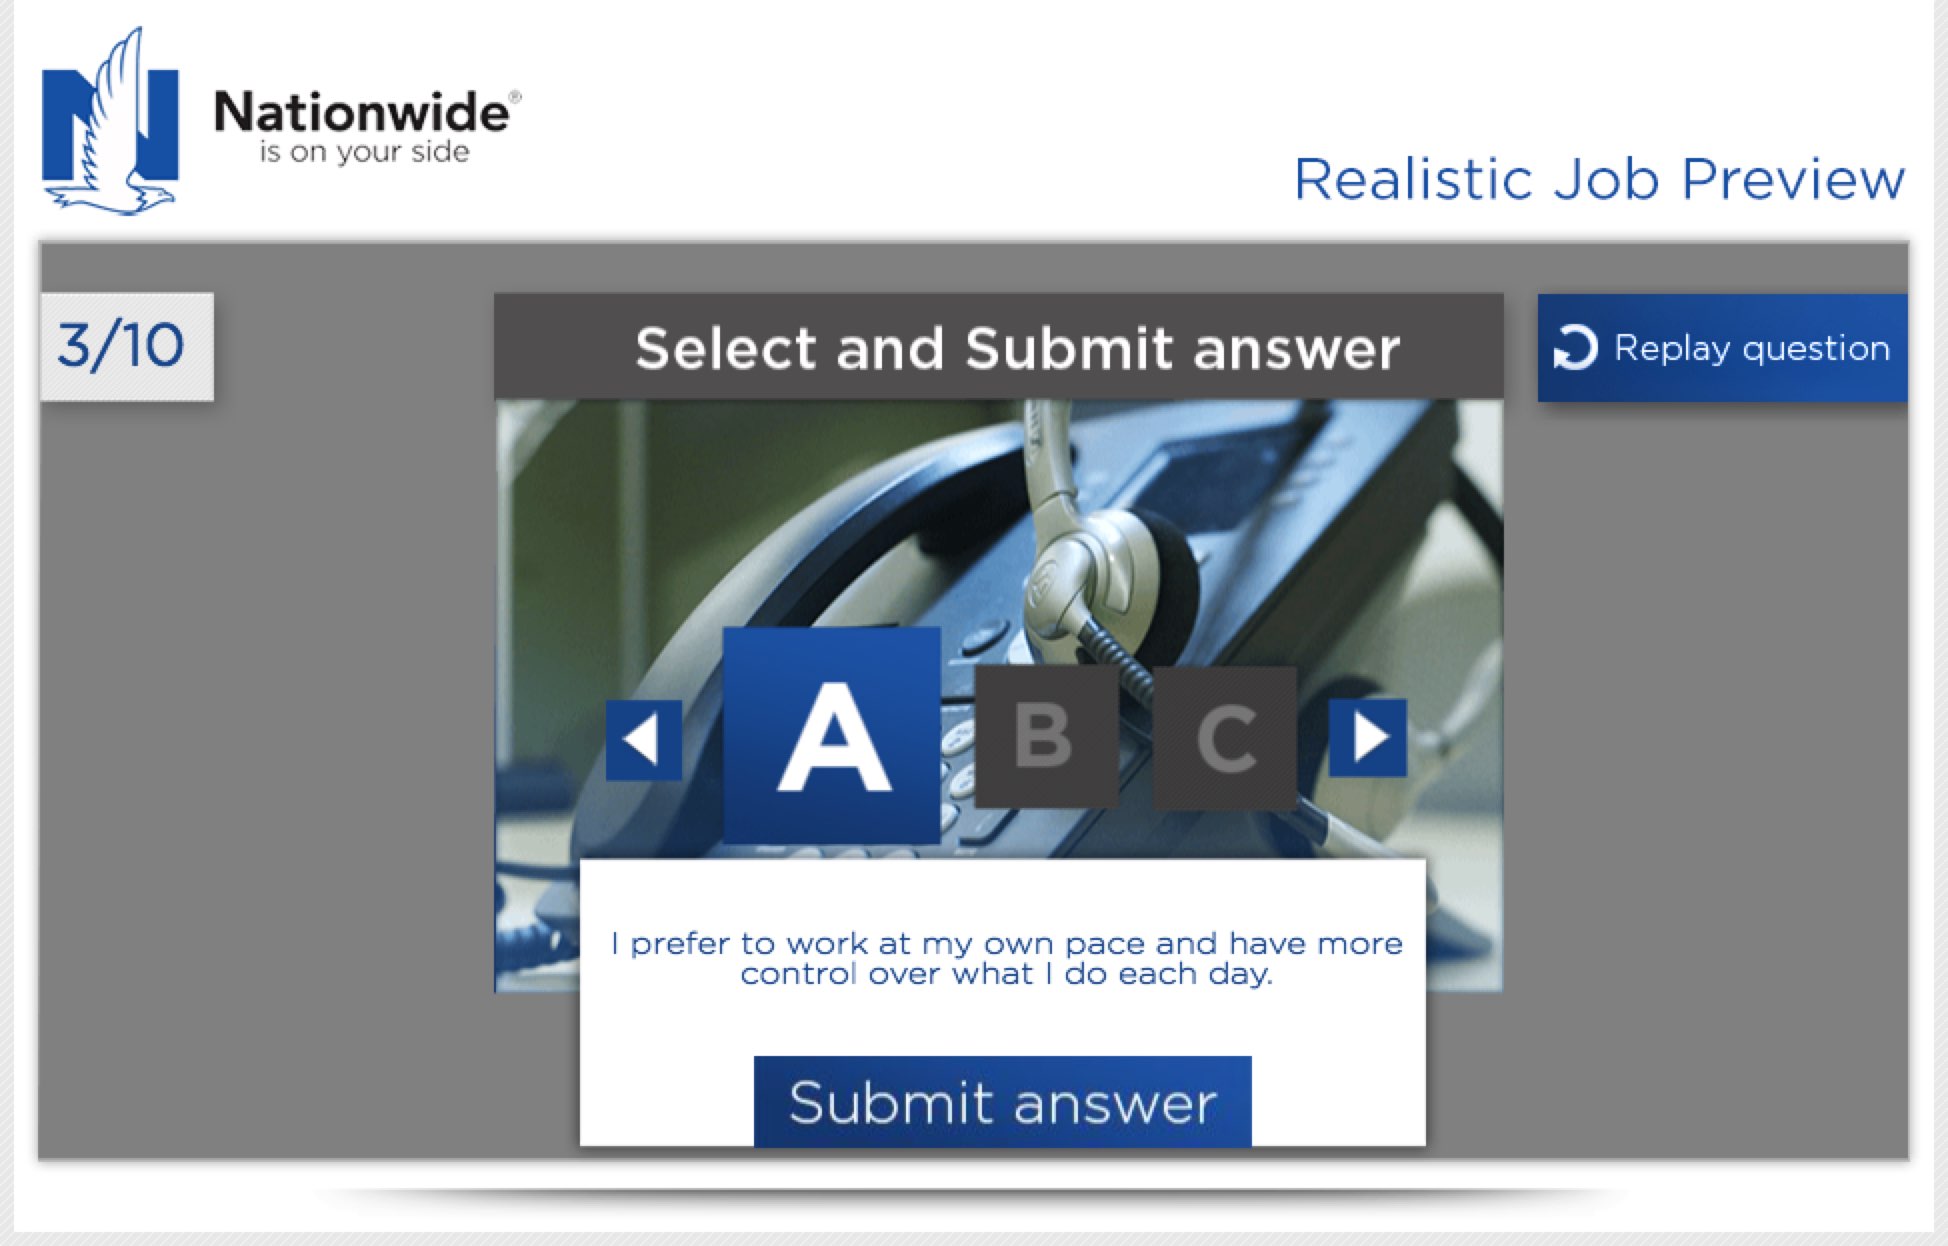 Realistic Job Preview Example by Nationwide Insurance | Ongig Blog